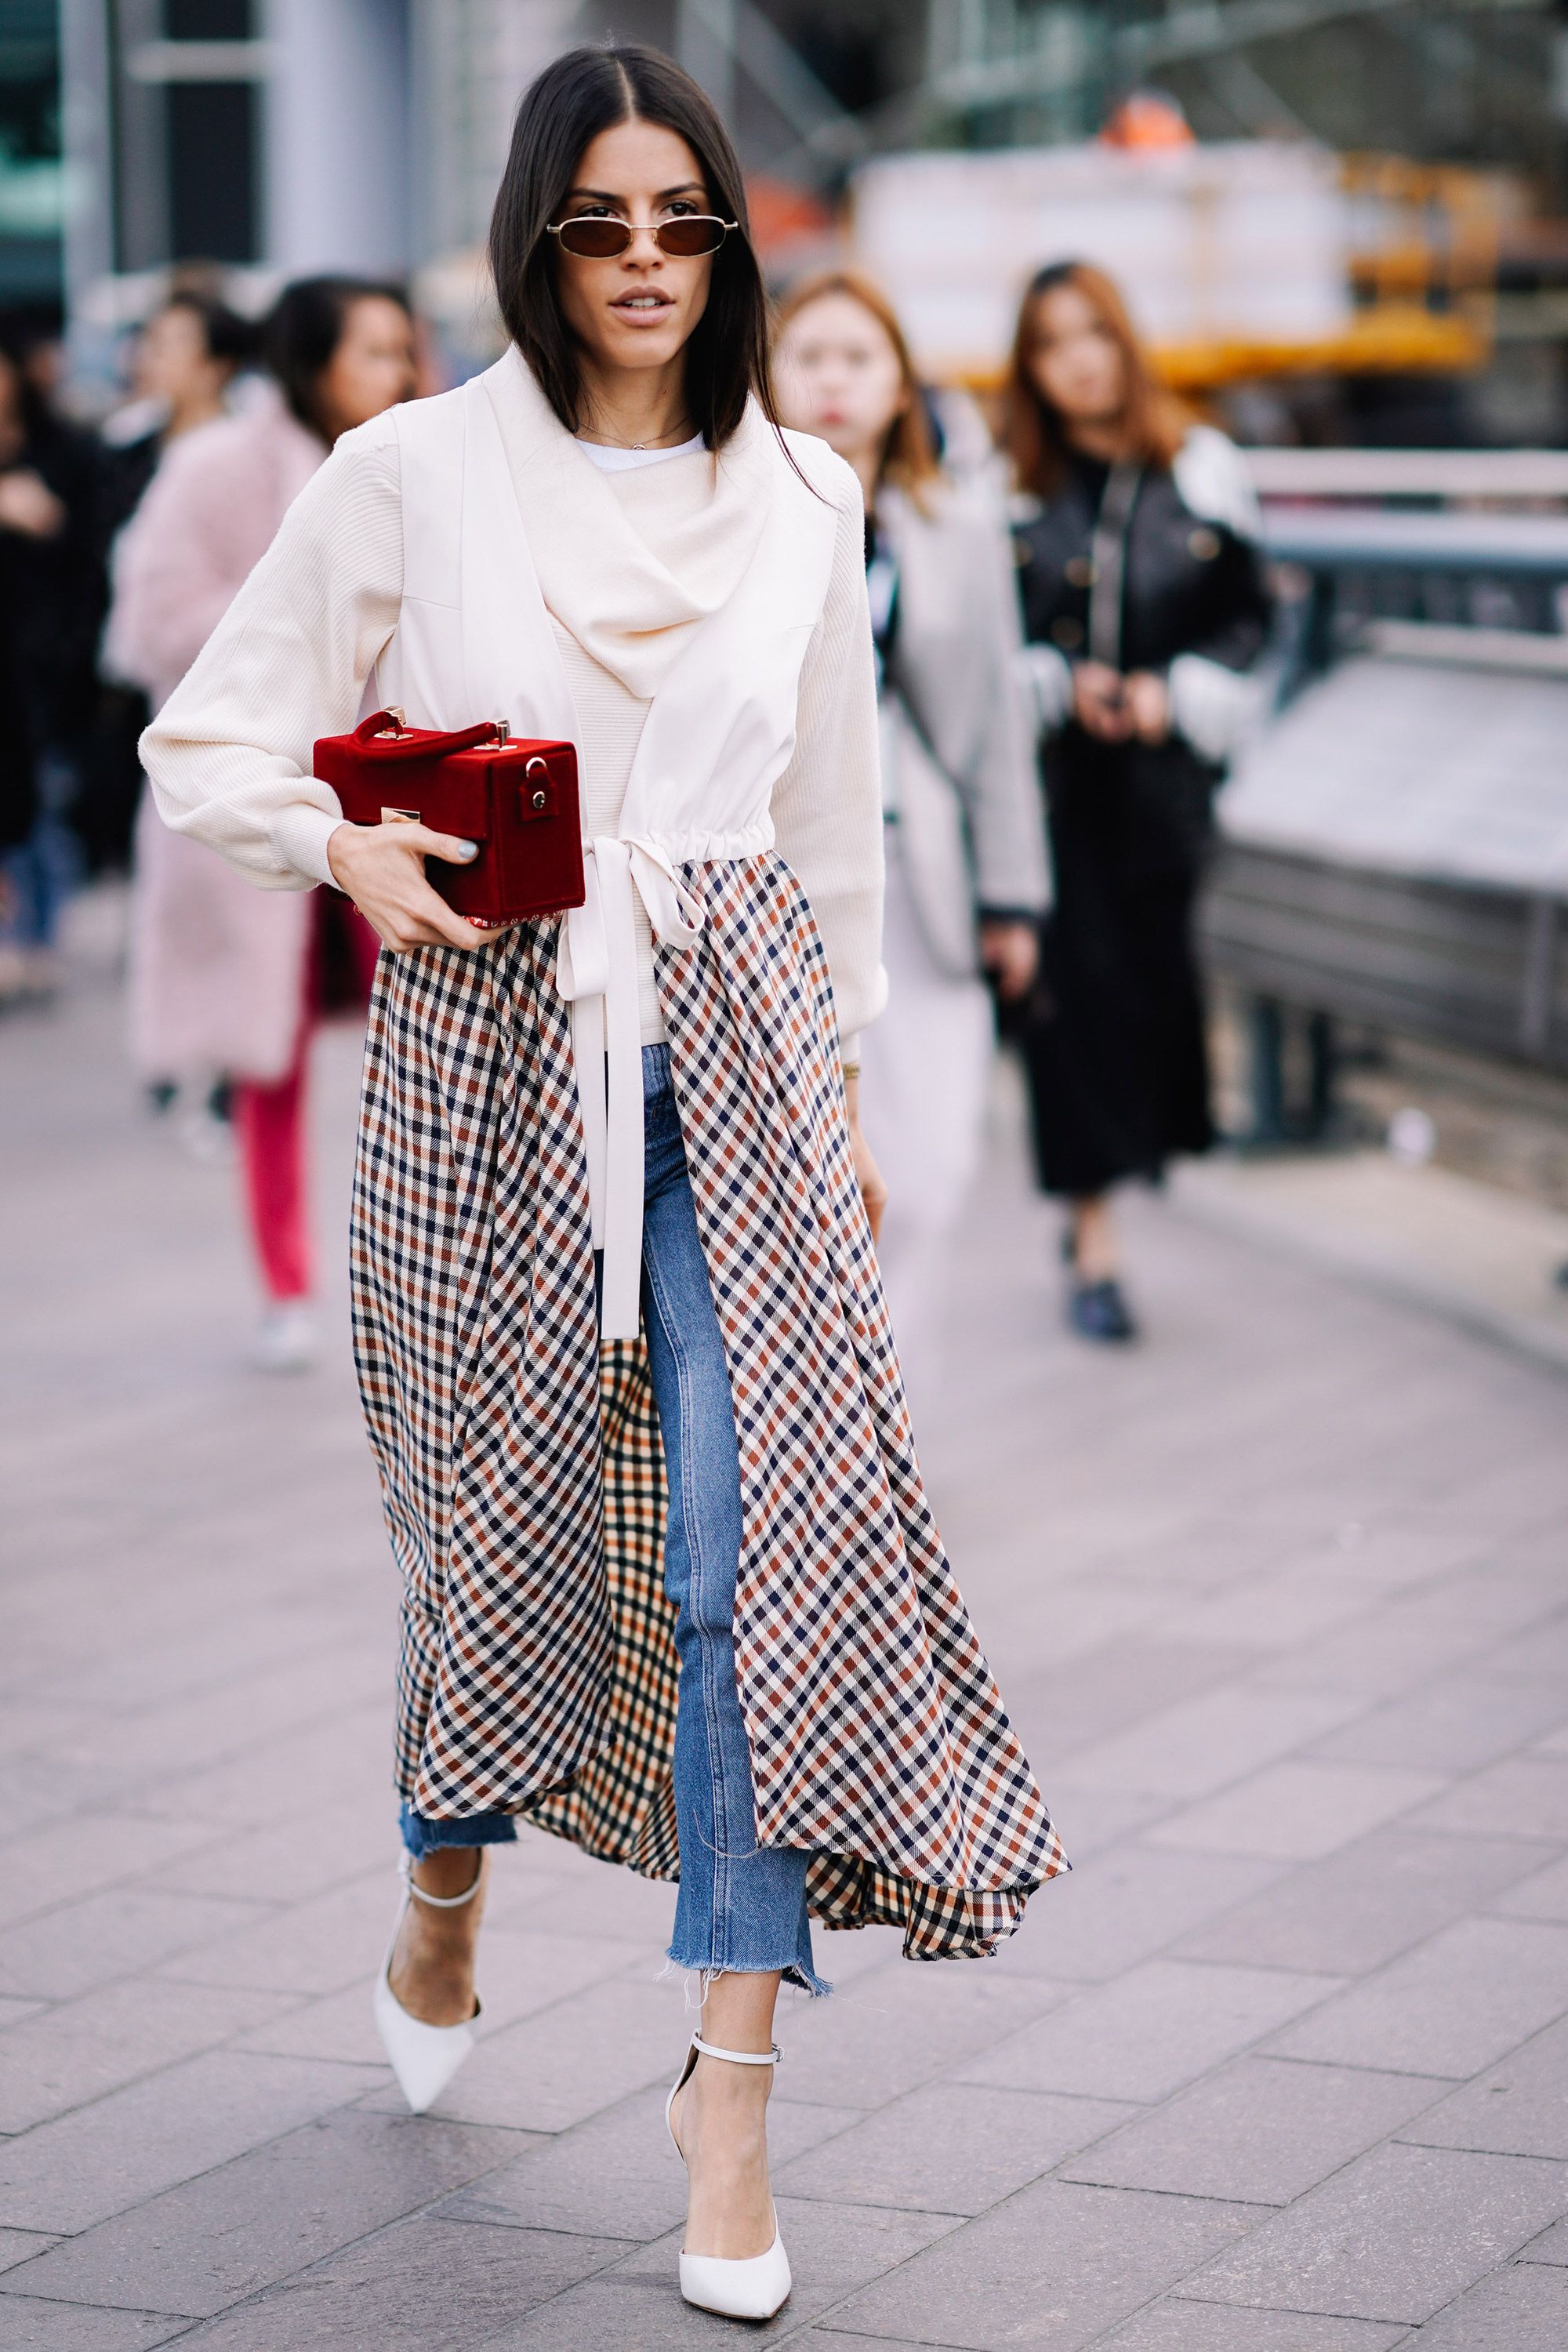 How To Style The Controversial Skirt Over Pants in 2023